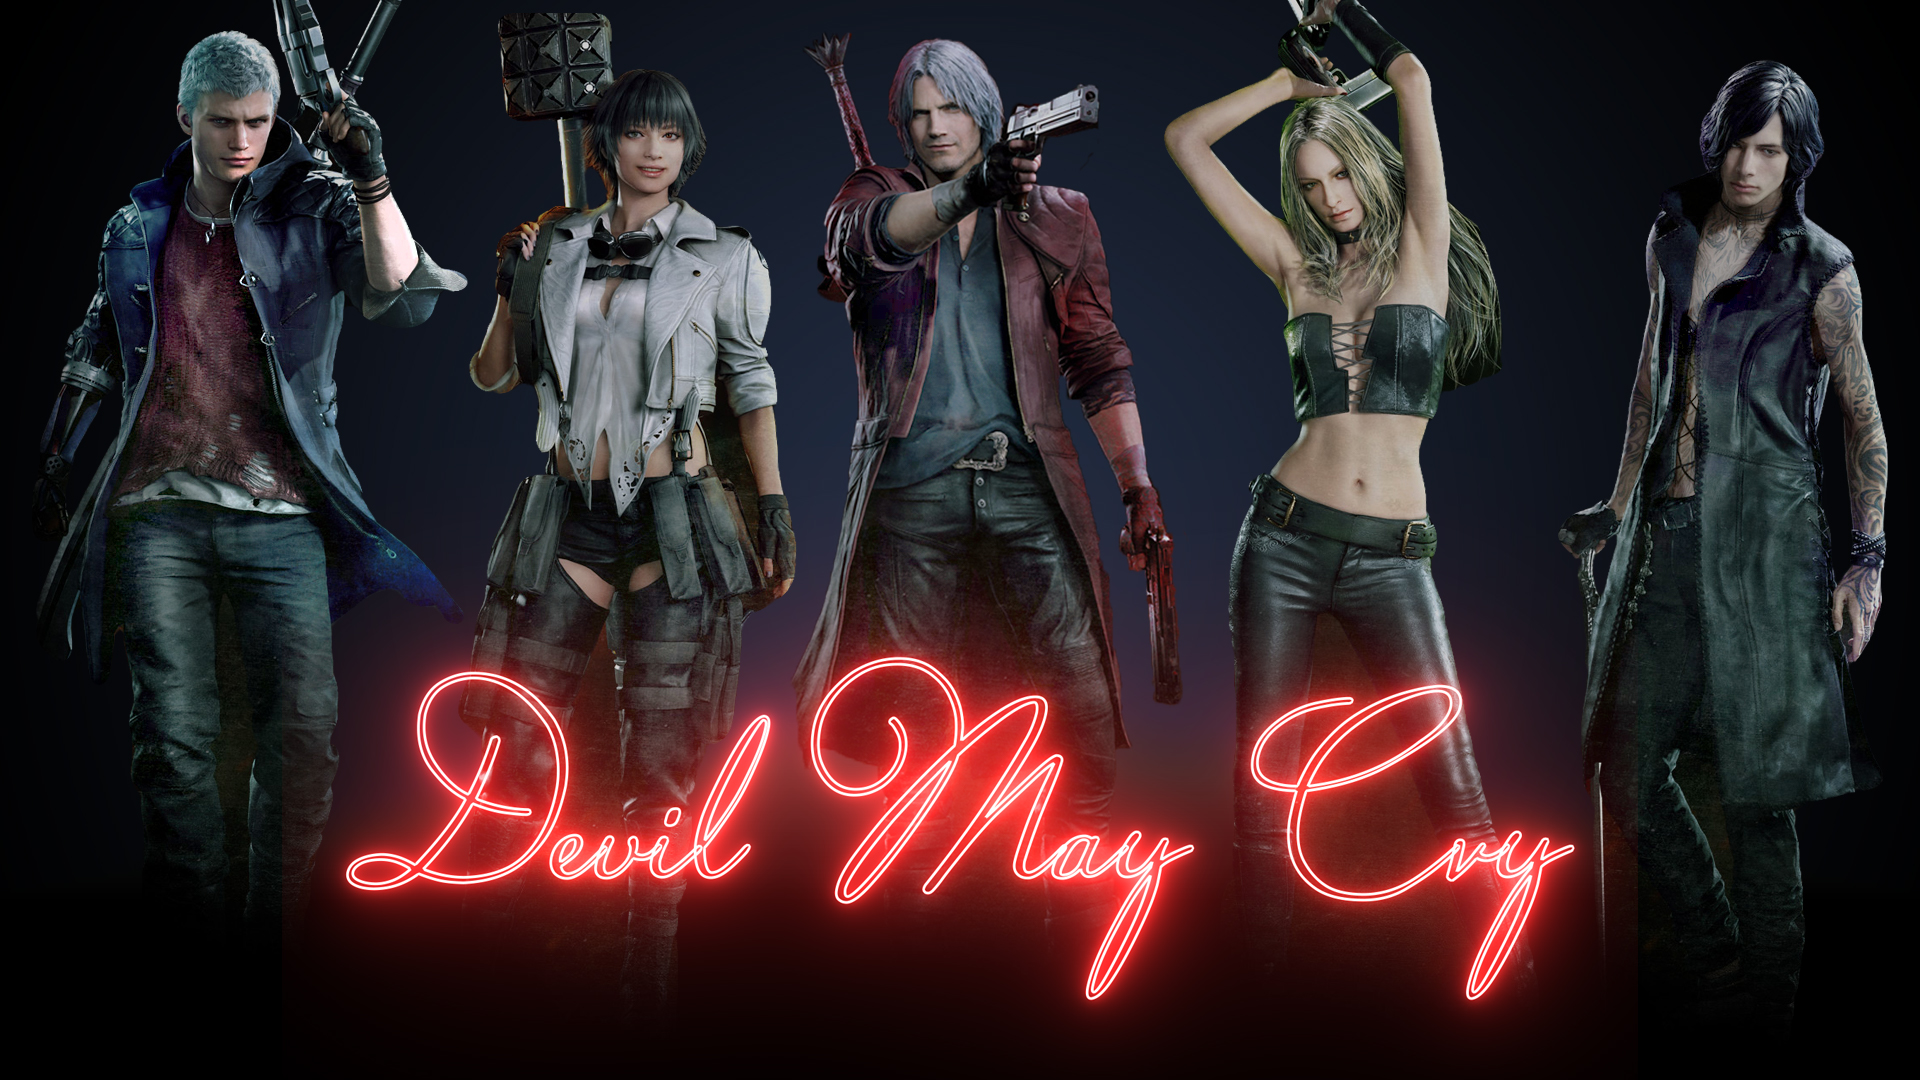 General 1920x1080 Devil May Cry Devil May Cry 5 Dante (Devil May Cry) Nero (Devil May Cry) Lady (Devil May Cry) neon boys with guns gun gloves fingerless gloves aiming smiling video games video game characters